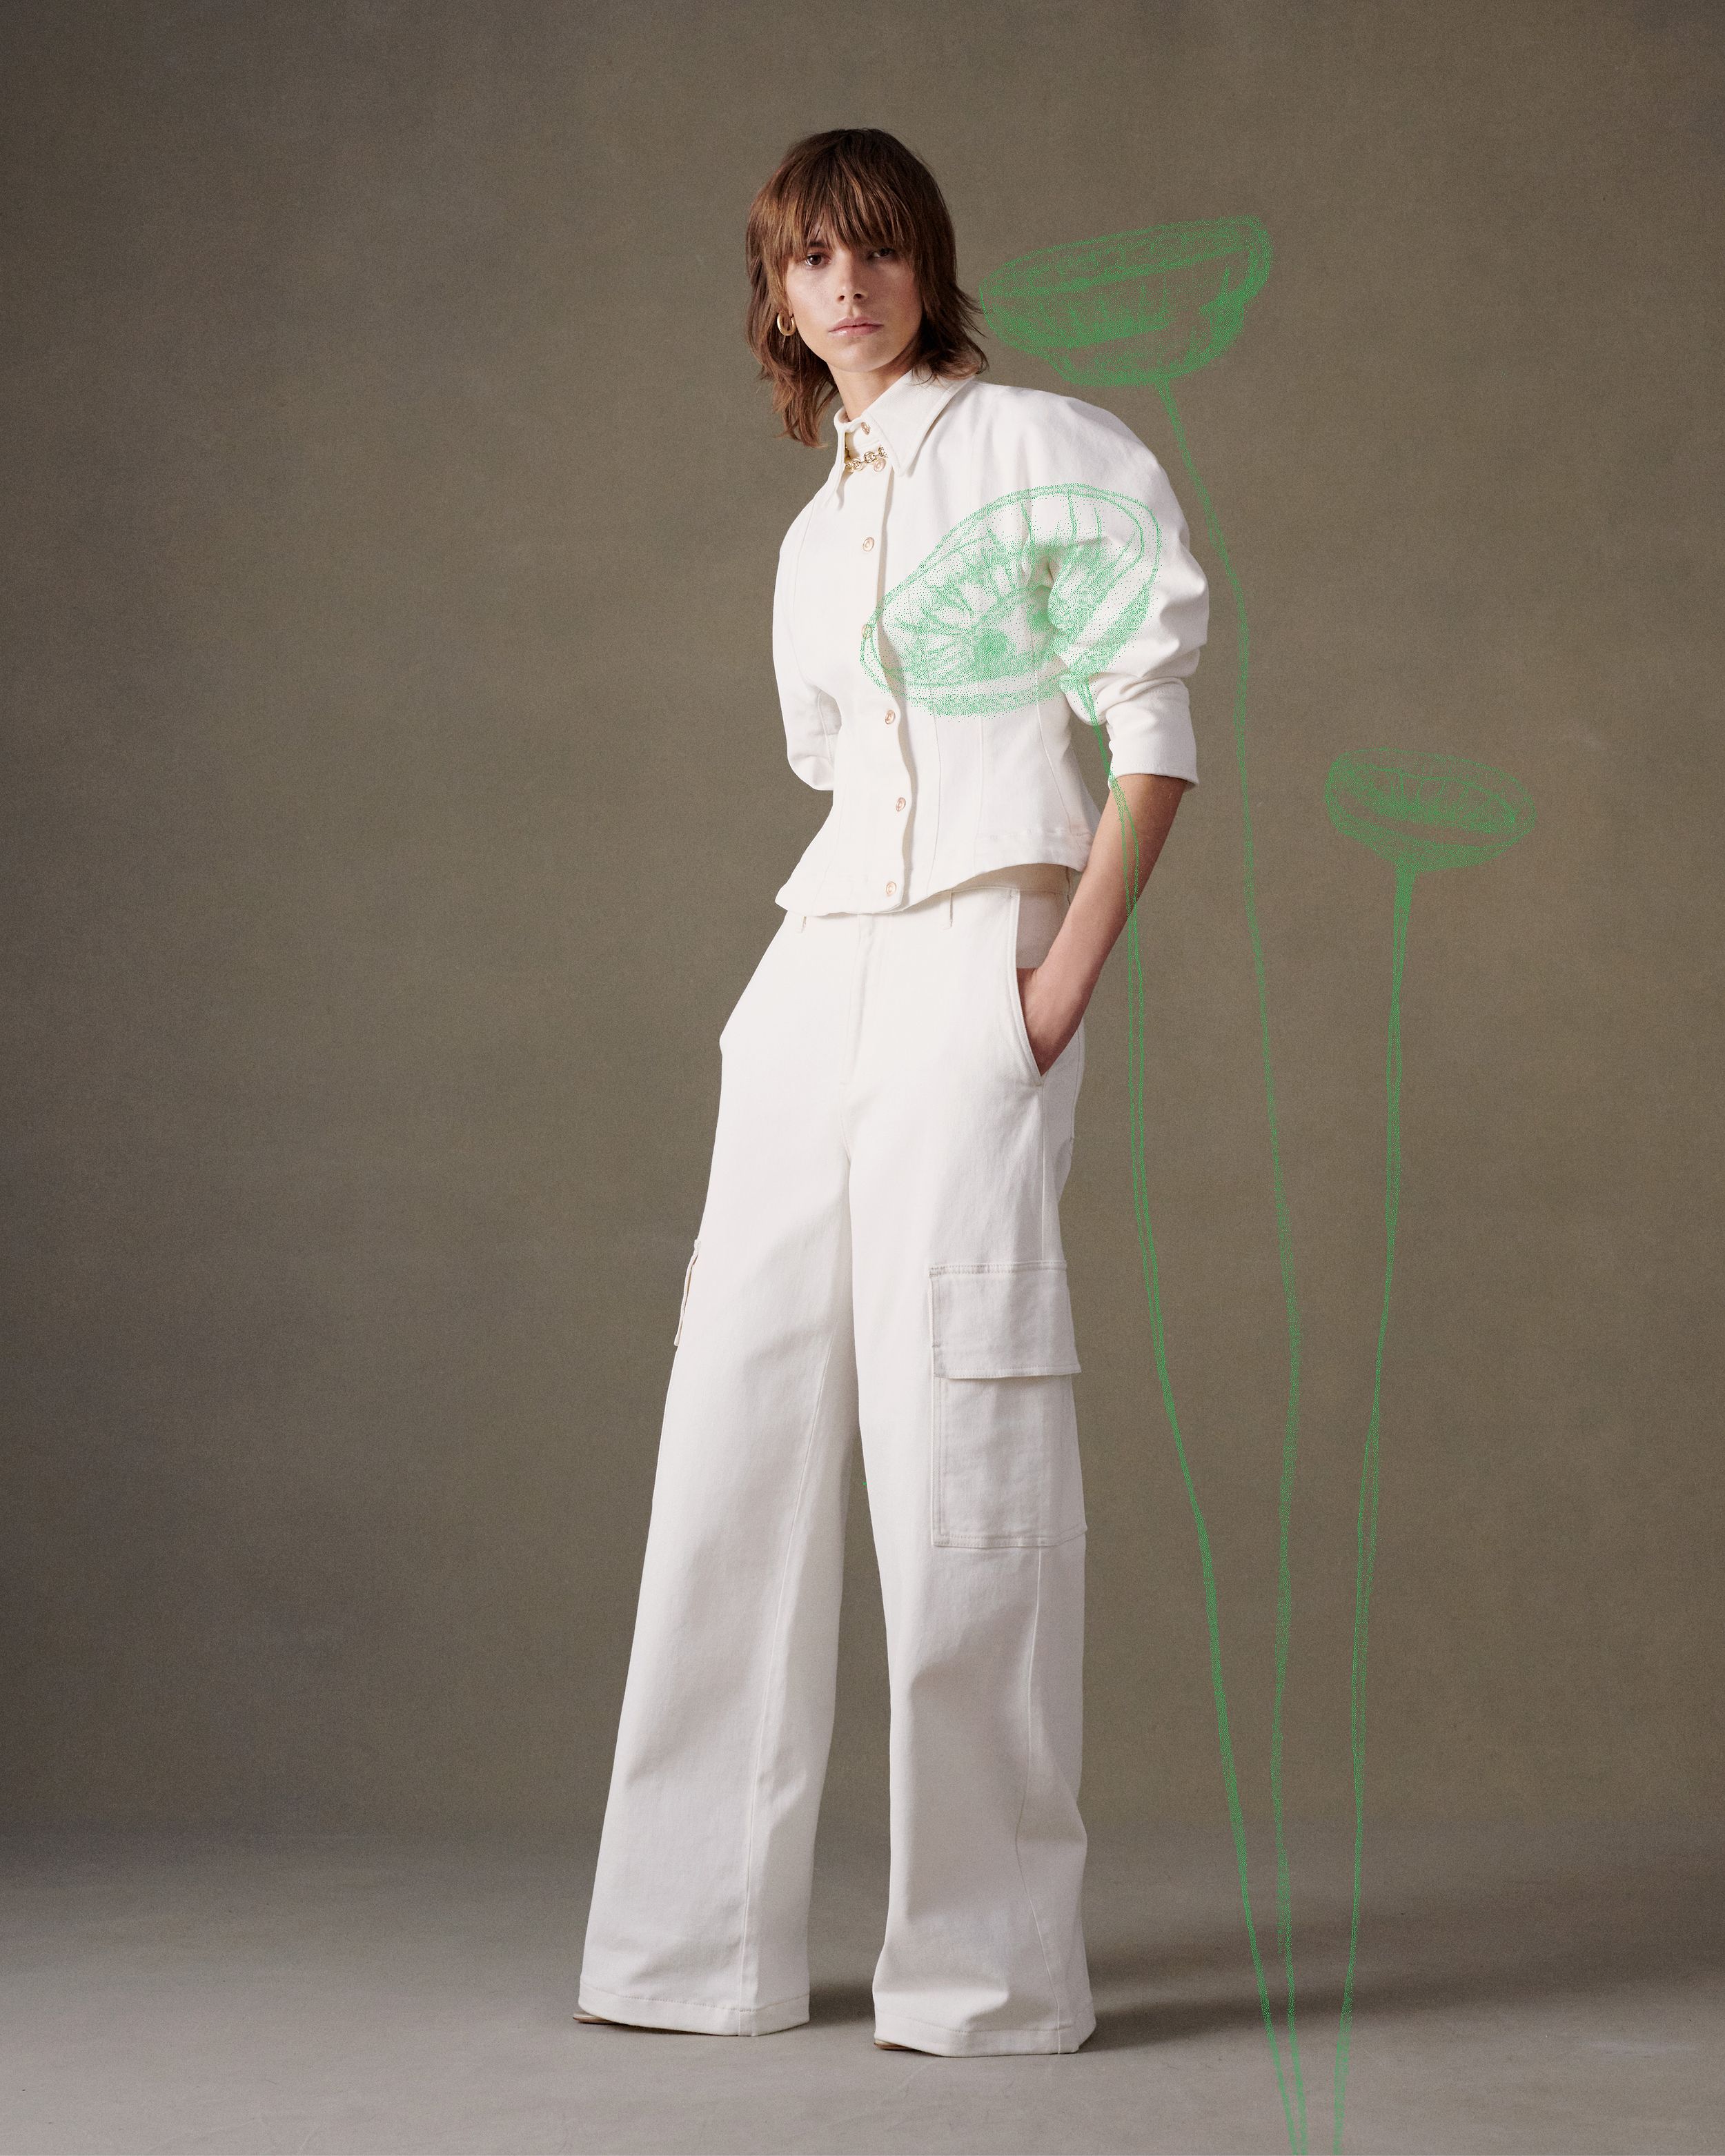 Model standing in white double denim set with a green poppy illustration overlaid on top